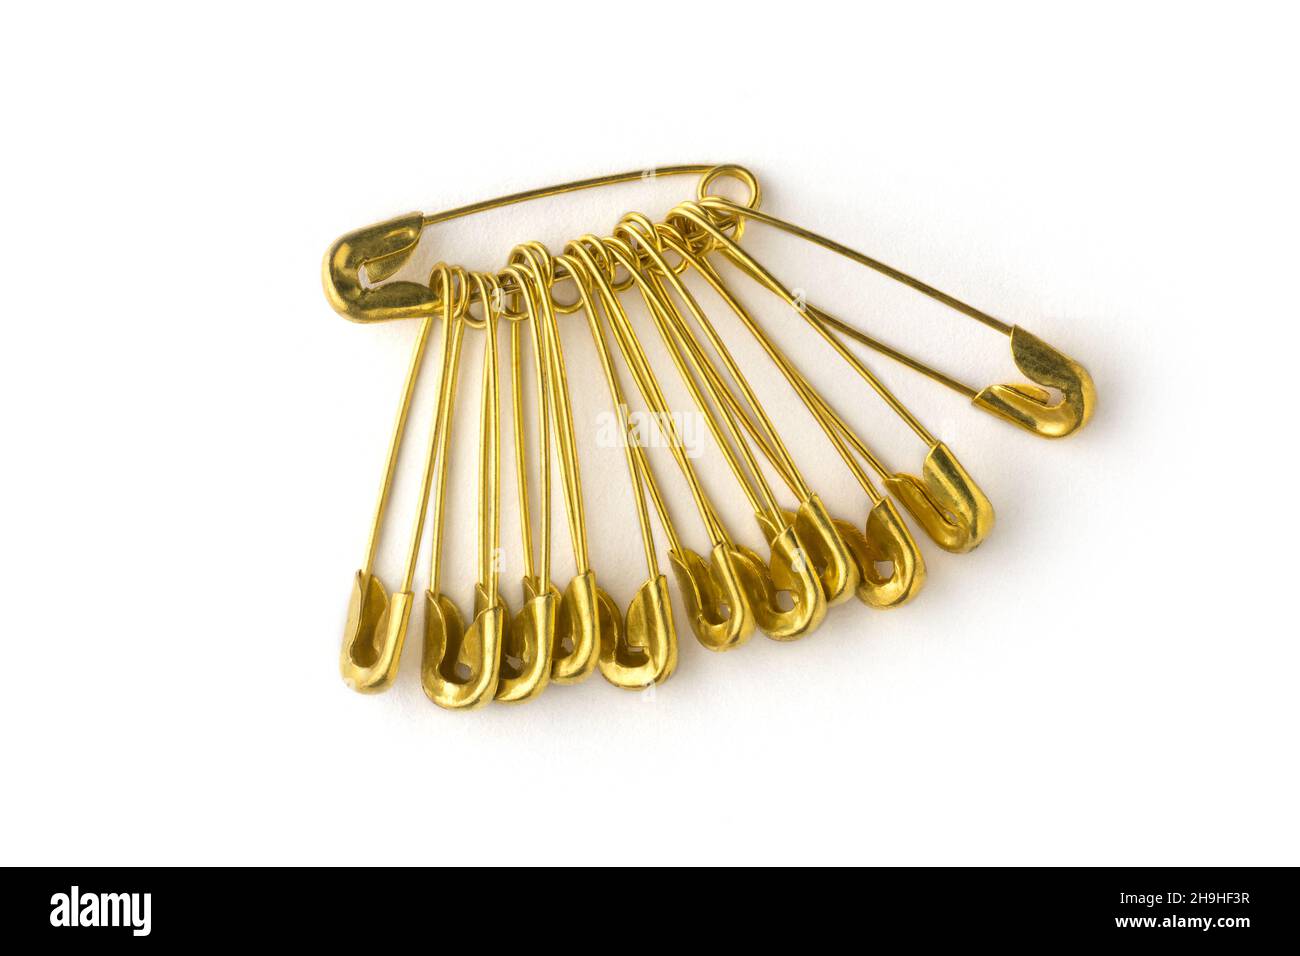 gold color safety pins, commonly used to fasten clothing, isolated on white background Stock Photo